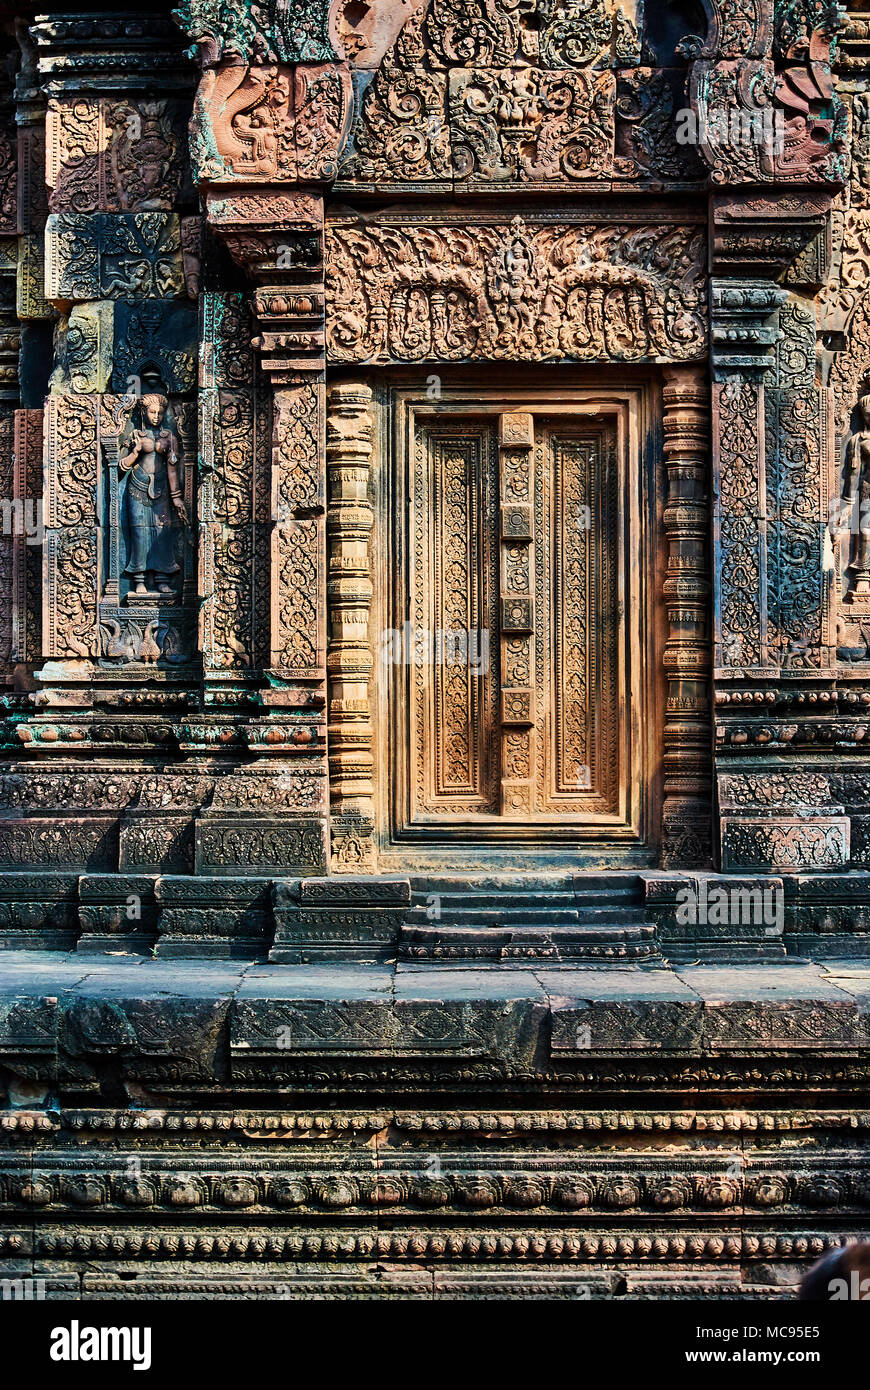 Details of a carved door in Siem reap temple, Cambodia Banteay Srey Stock Photo